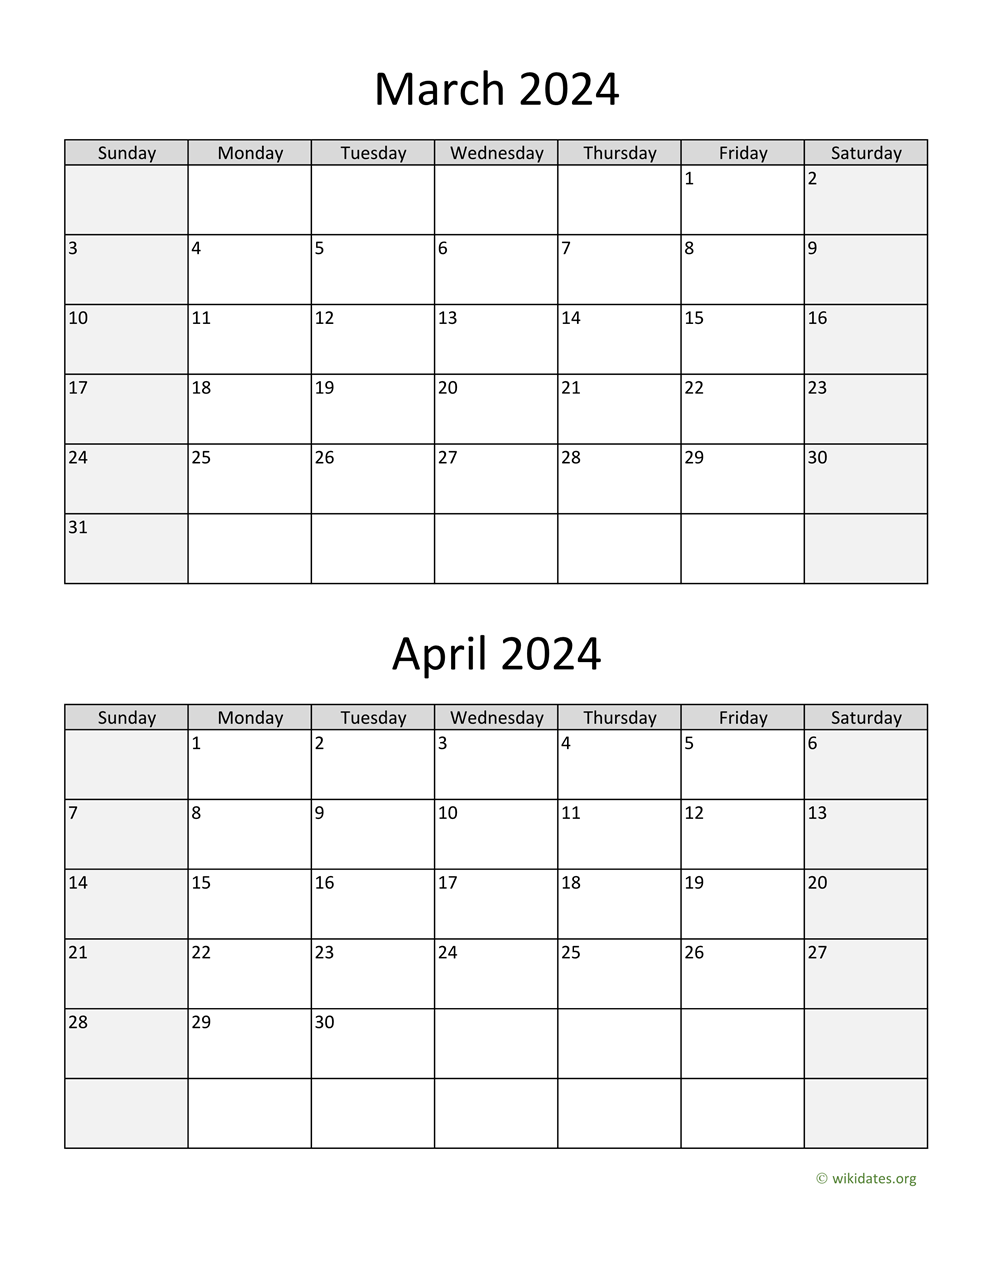 March And April 2024 Calendar | Wikidates for March And April 2024 Calendar Printable